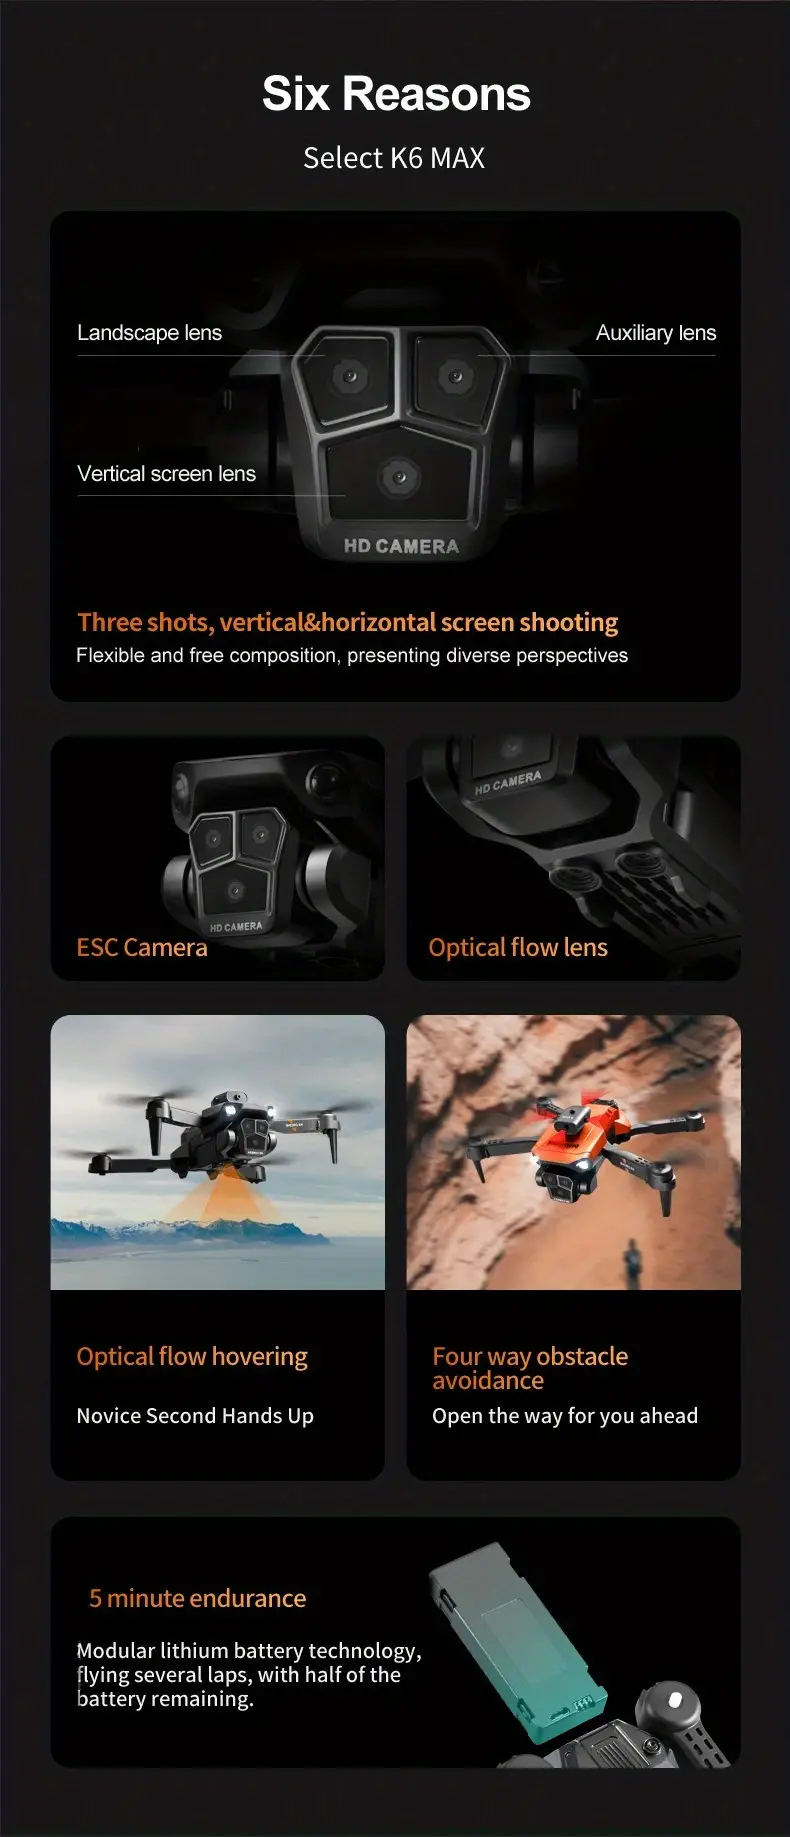 k6 max black optical flow hd triple camera remote control drone with 1 2 3 batteries esc camera 360 smart obstacle avoidance wifi fpv headless mode track flight foldable quadcopter details 1